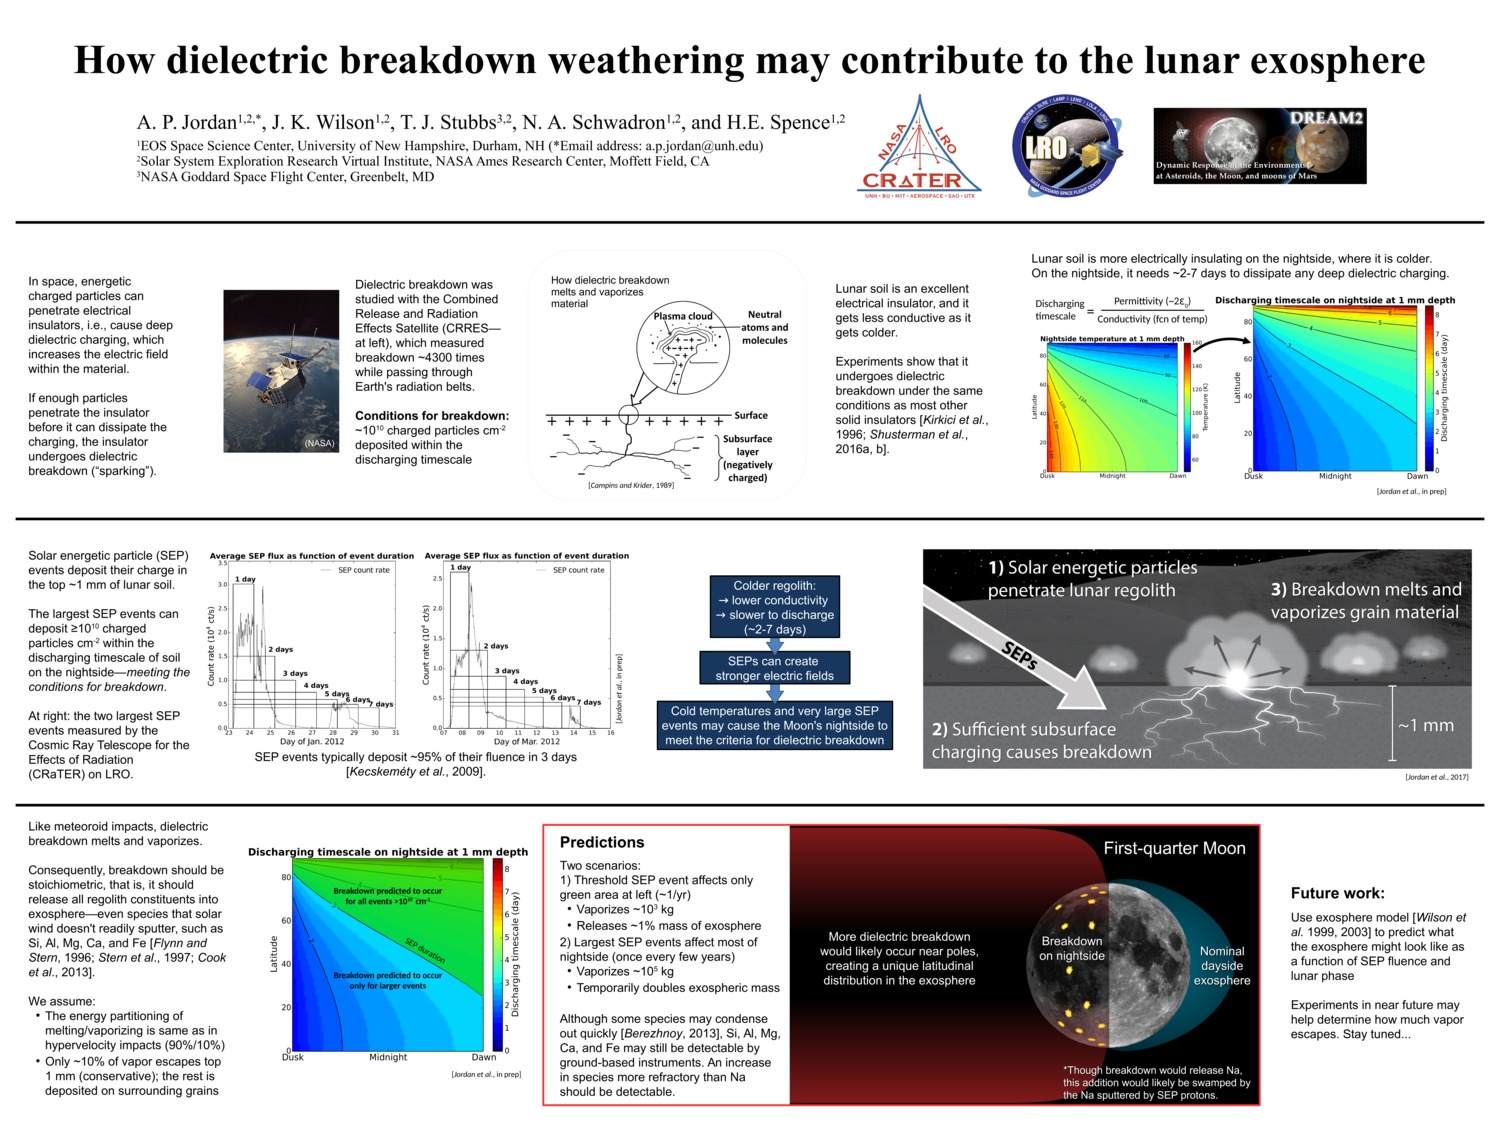 How Dielectric Breakdown Weathering May Contribute To The Lunar Exosphere by api44